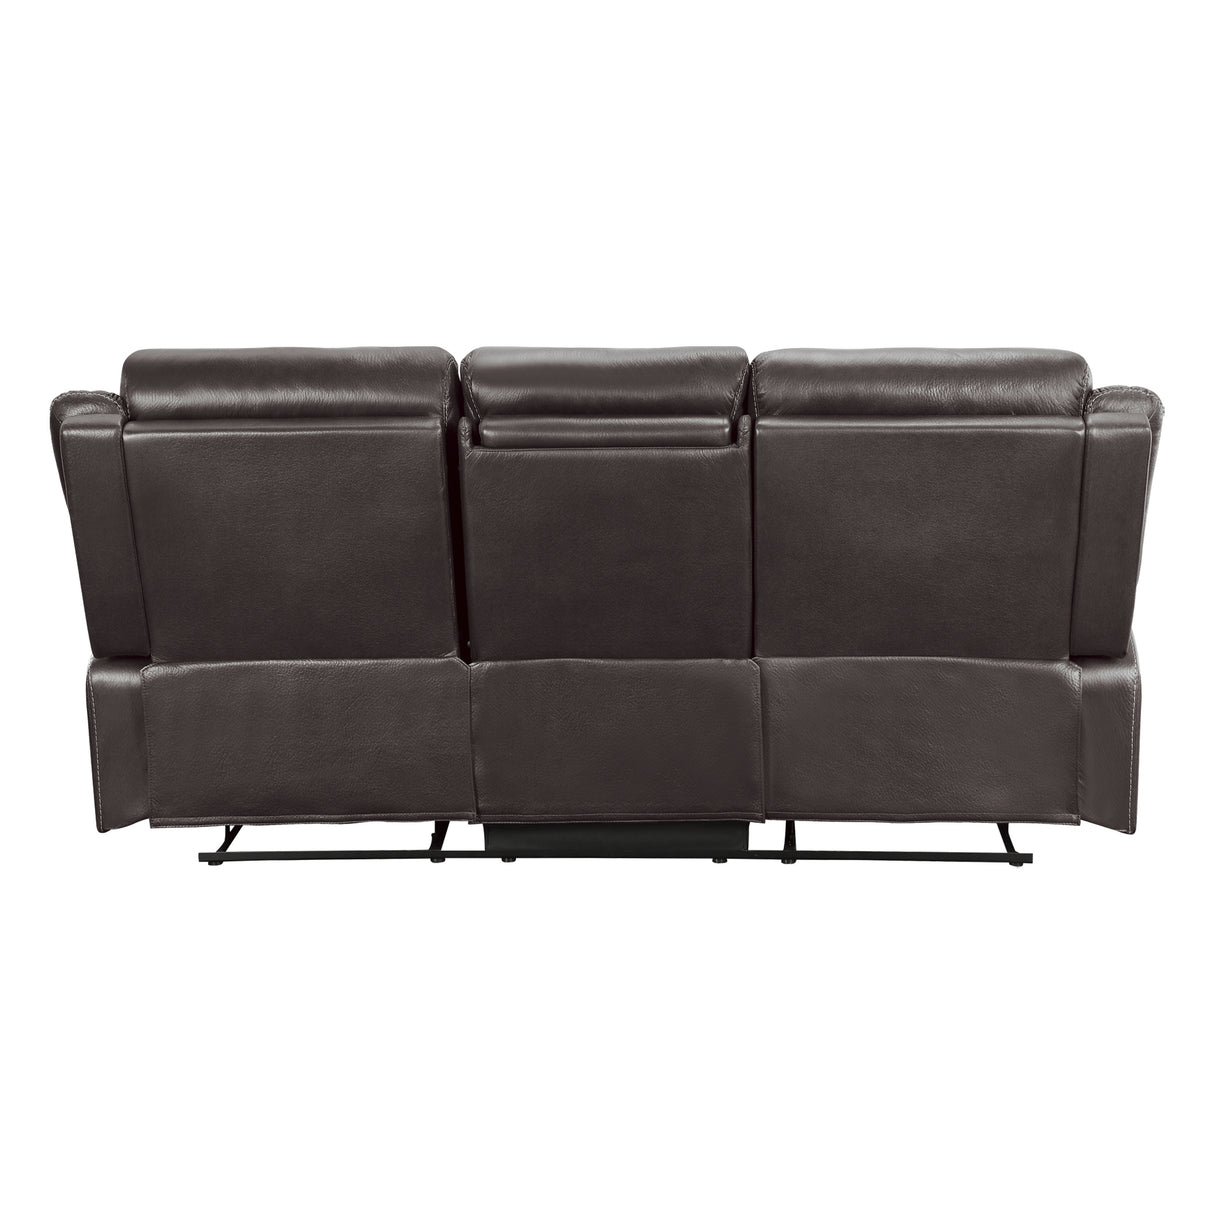 Yerba Dark Brown Double Lay Flat Reclining Sofa With Center Drop-Down Cup Holders